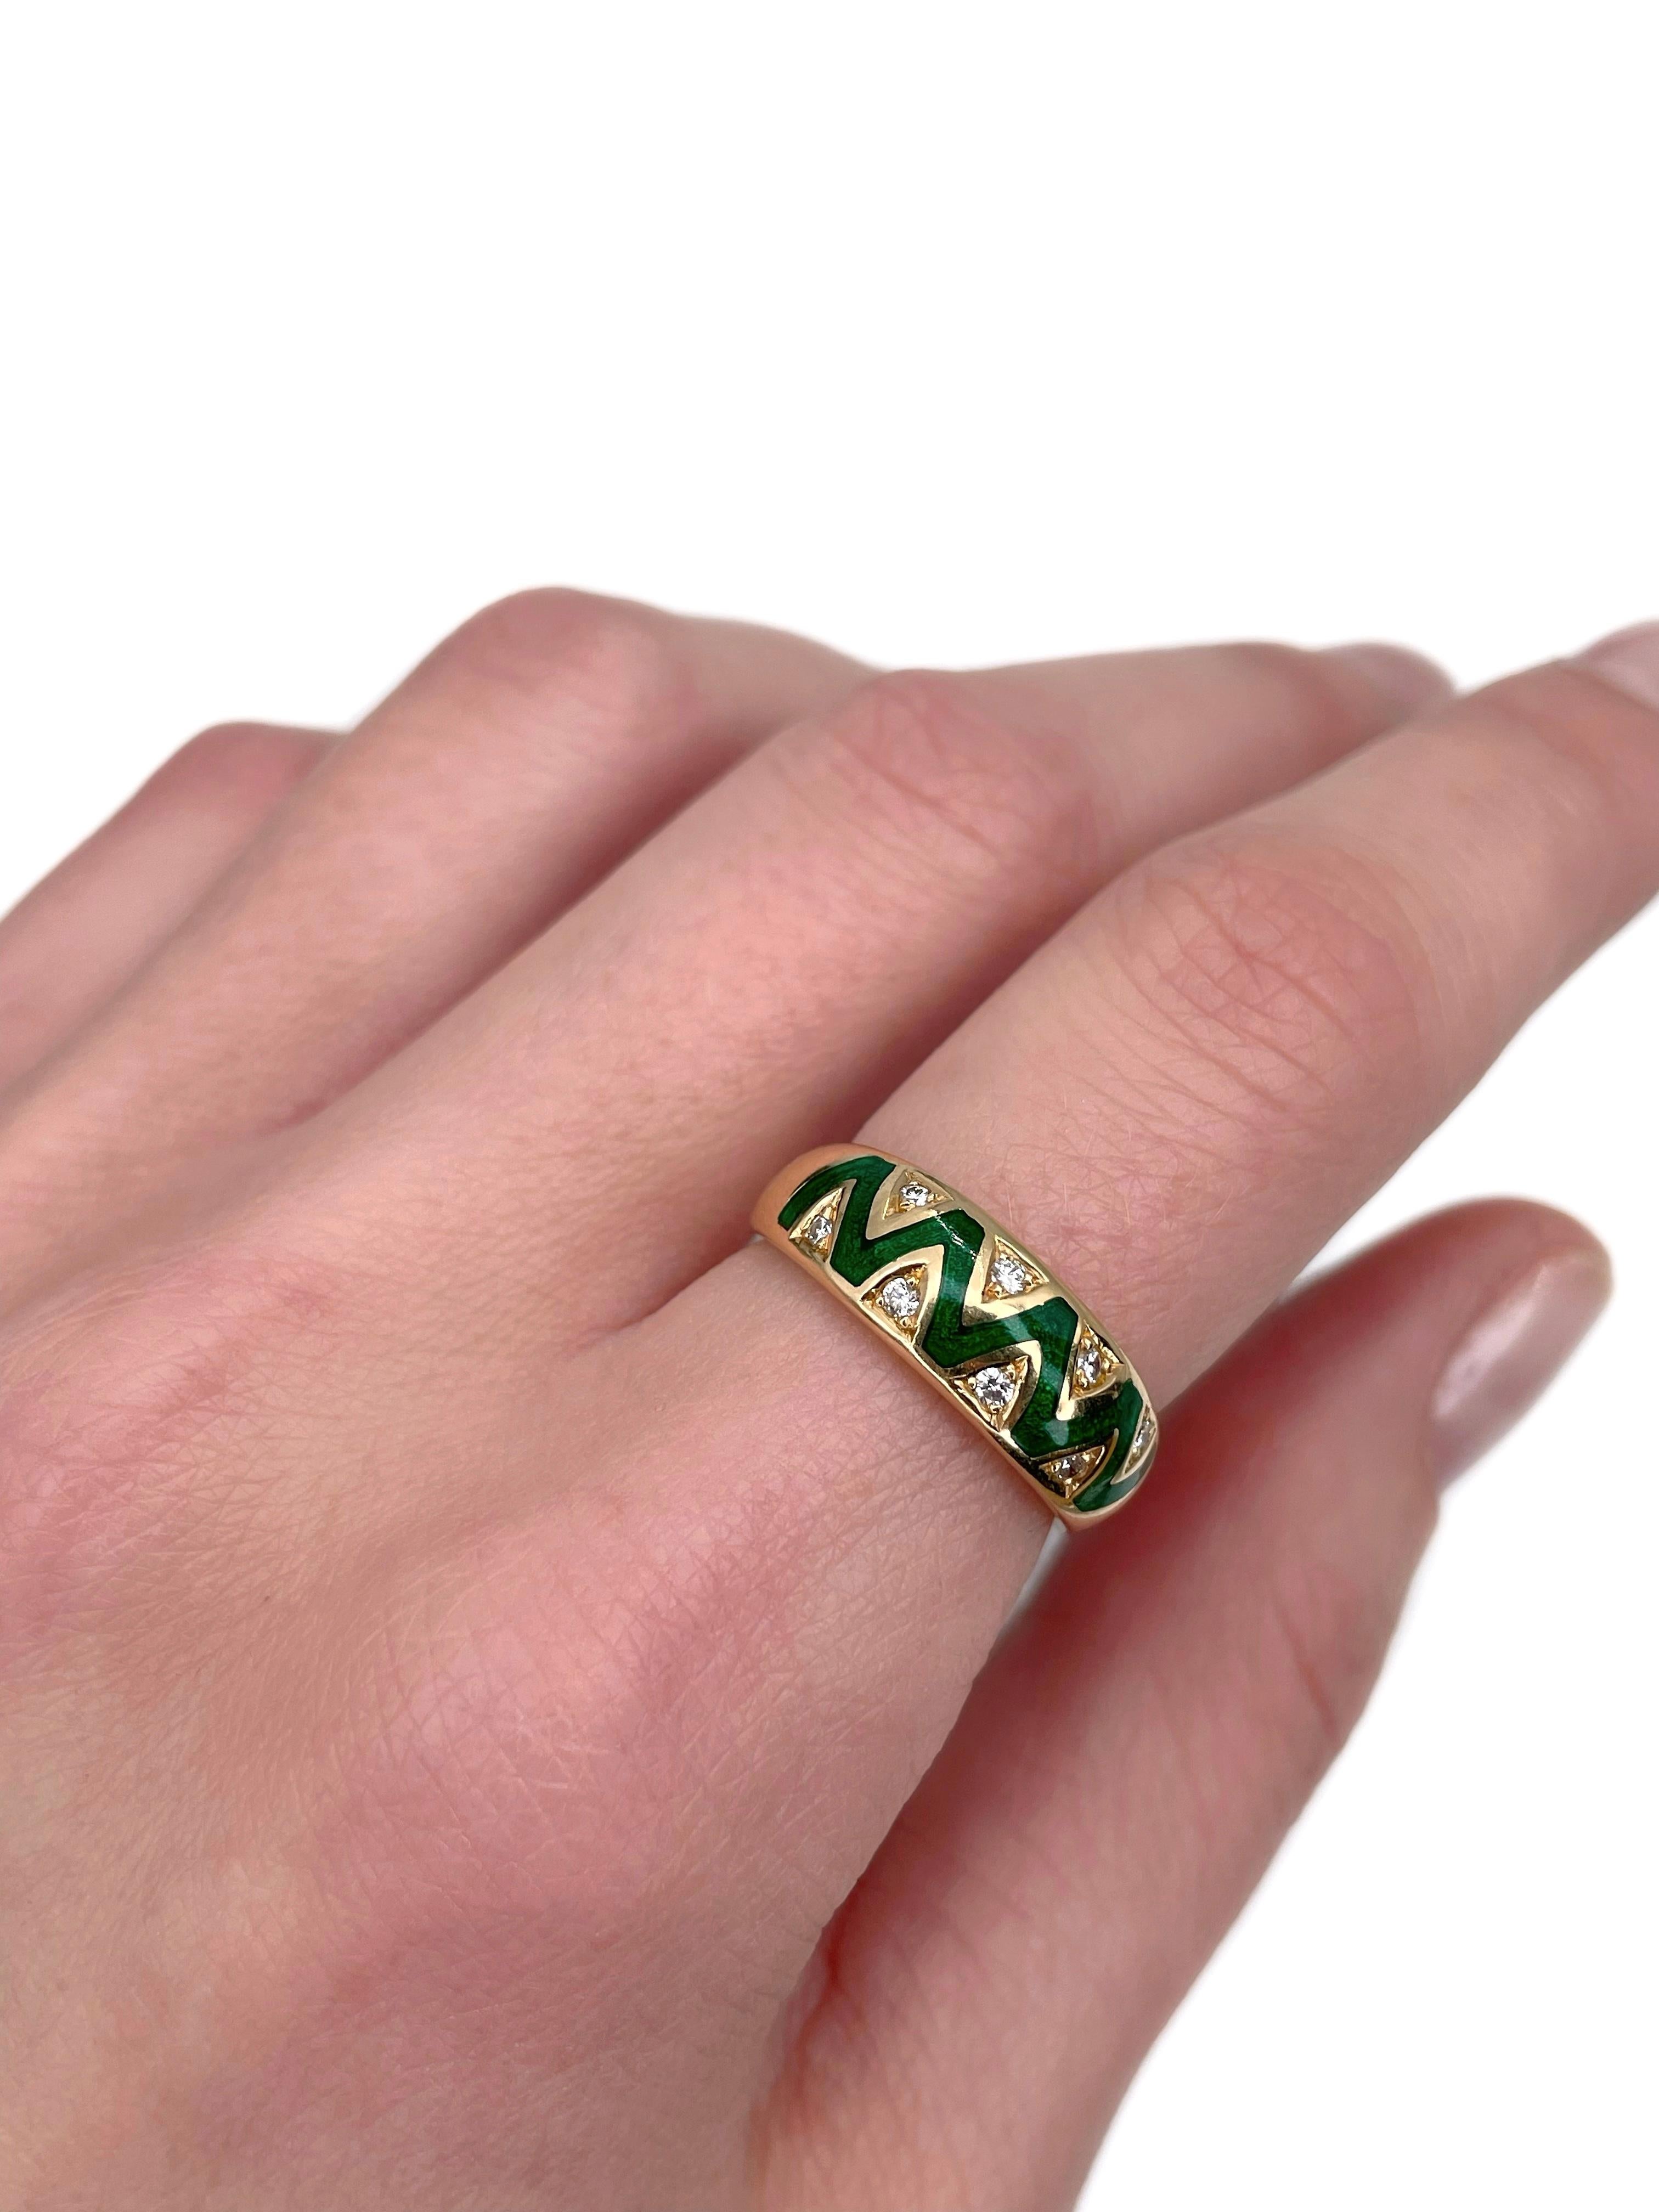 This is a vintage band ring crafted in 18K yellow gold. Circa 1980. 

It features 8 round brilliant cut diamonds (TW 0.12ct, RW-W, VS-SI) and green enamel. 

Weight: 4.58g
Size: 16.75 (US 6.25)

———

If you have any questions, please feel free to